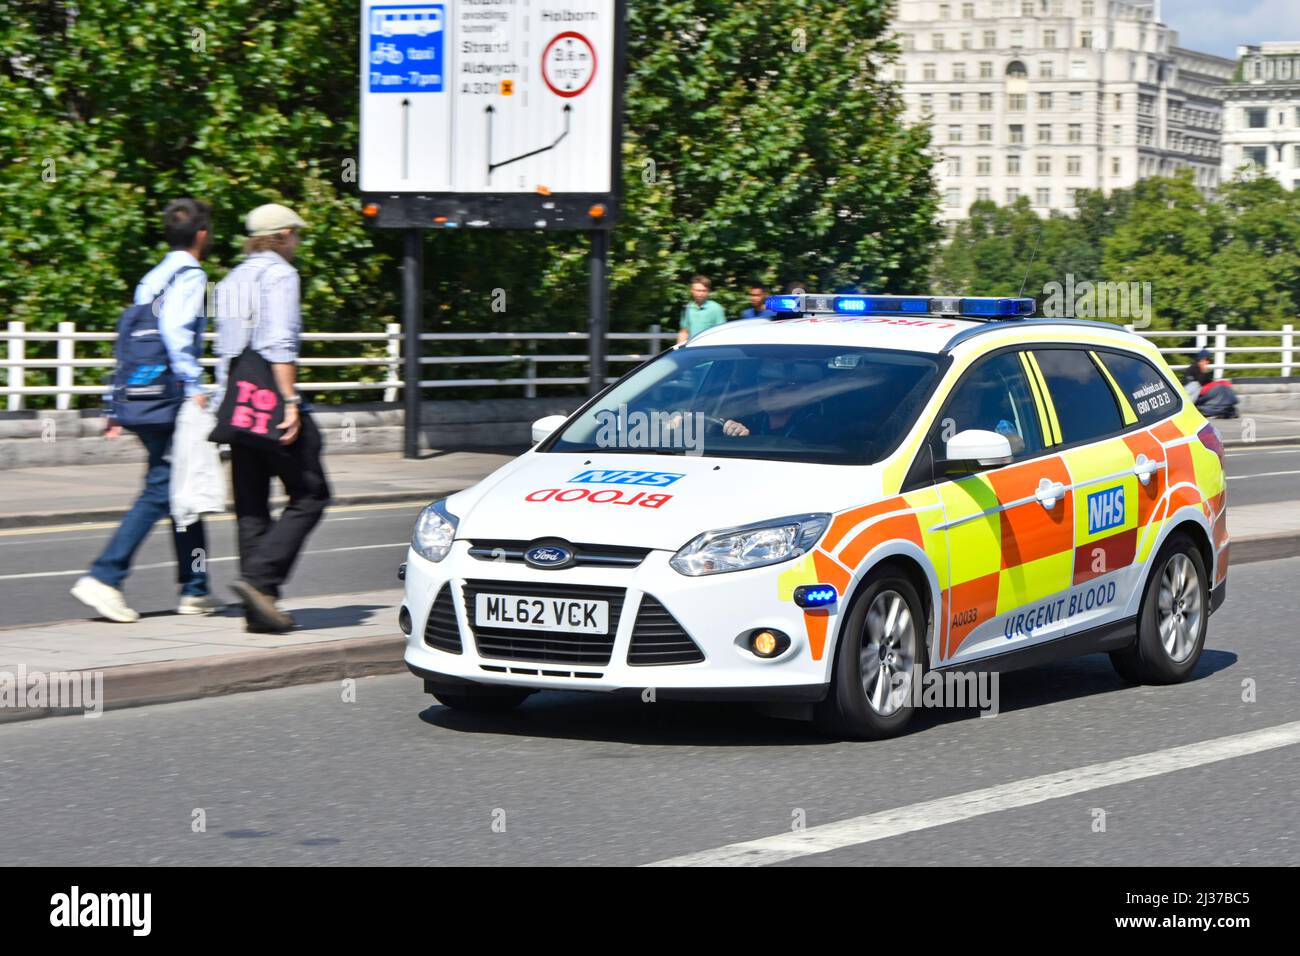 Urgent NHS blood delivery in white Ford car with Battenberg reflective markings driving on blue lights at speed on Waterloo Bridge London England UK Stock Photo